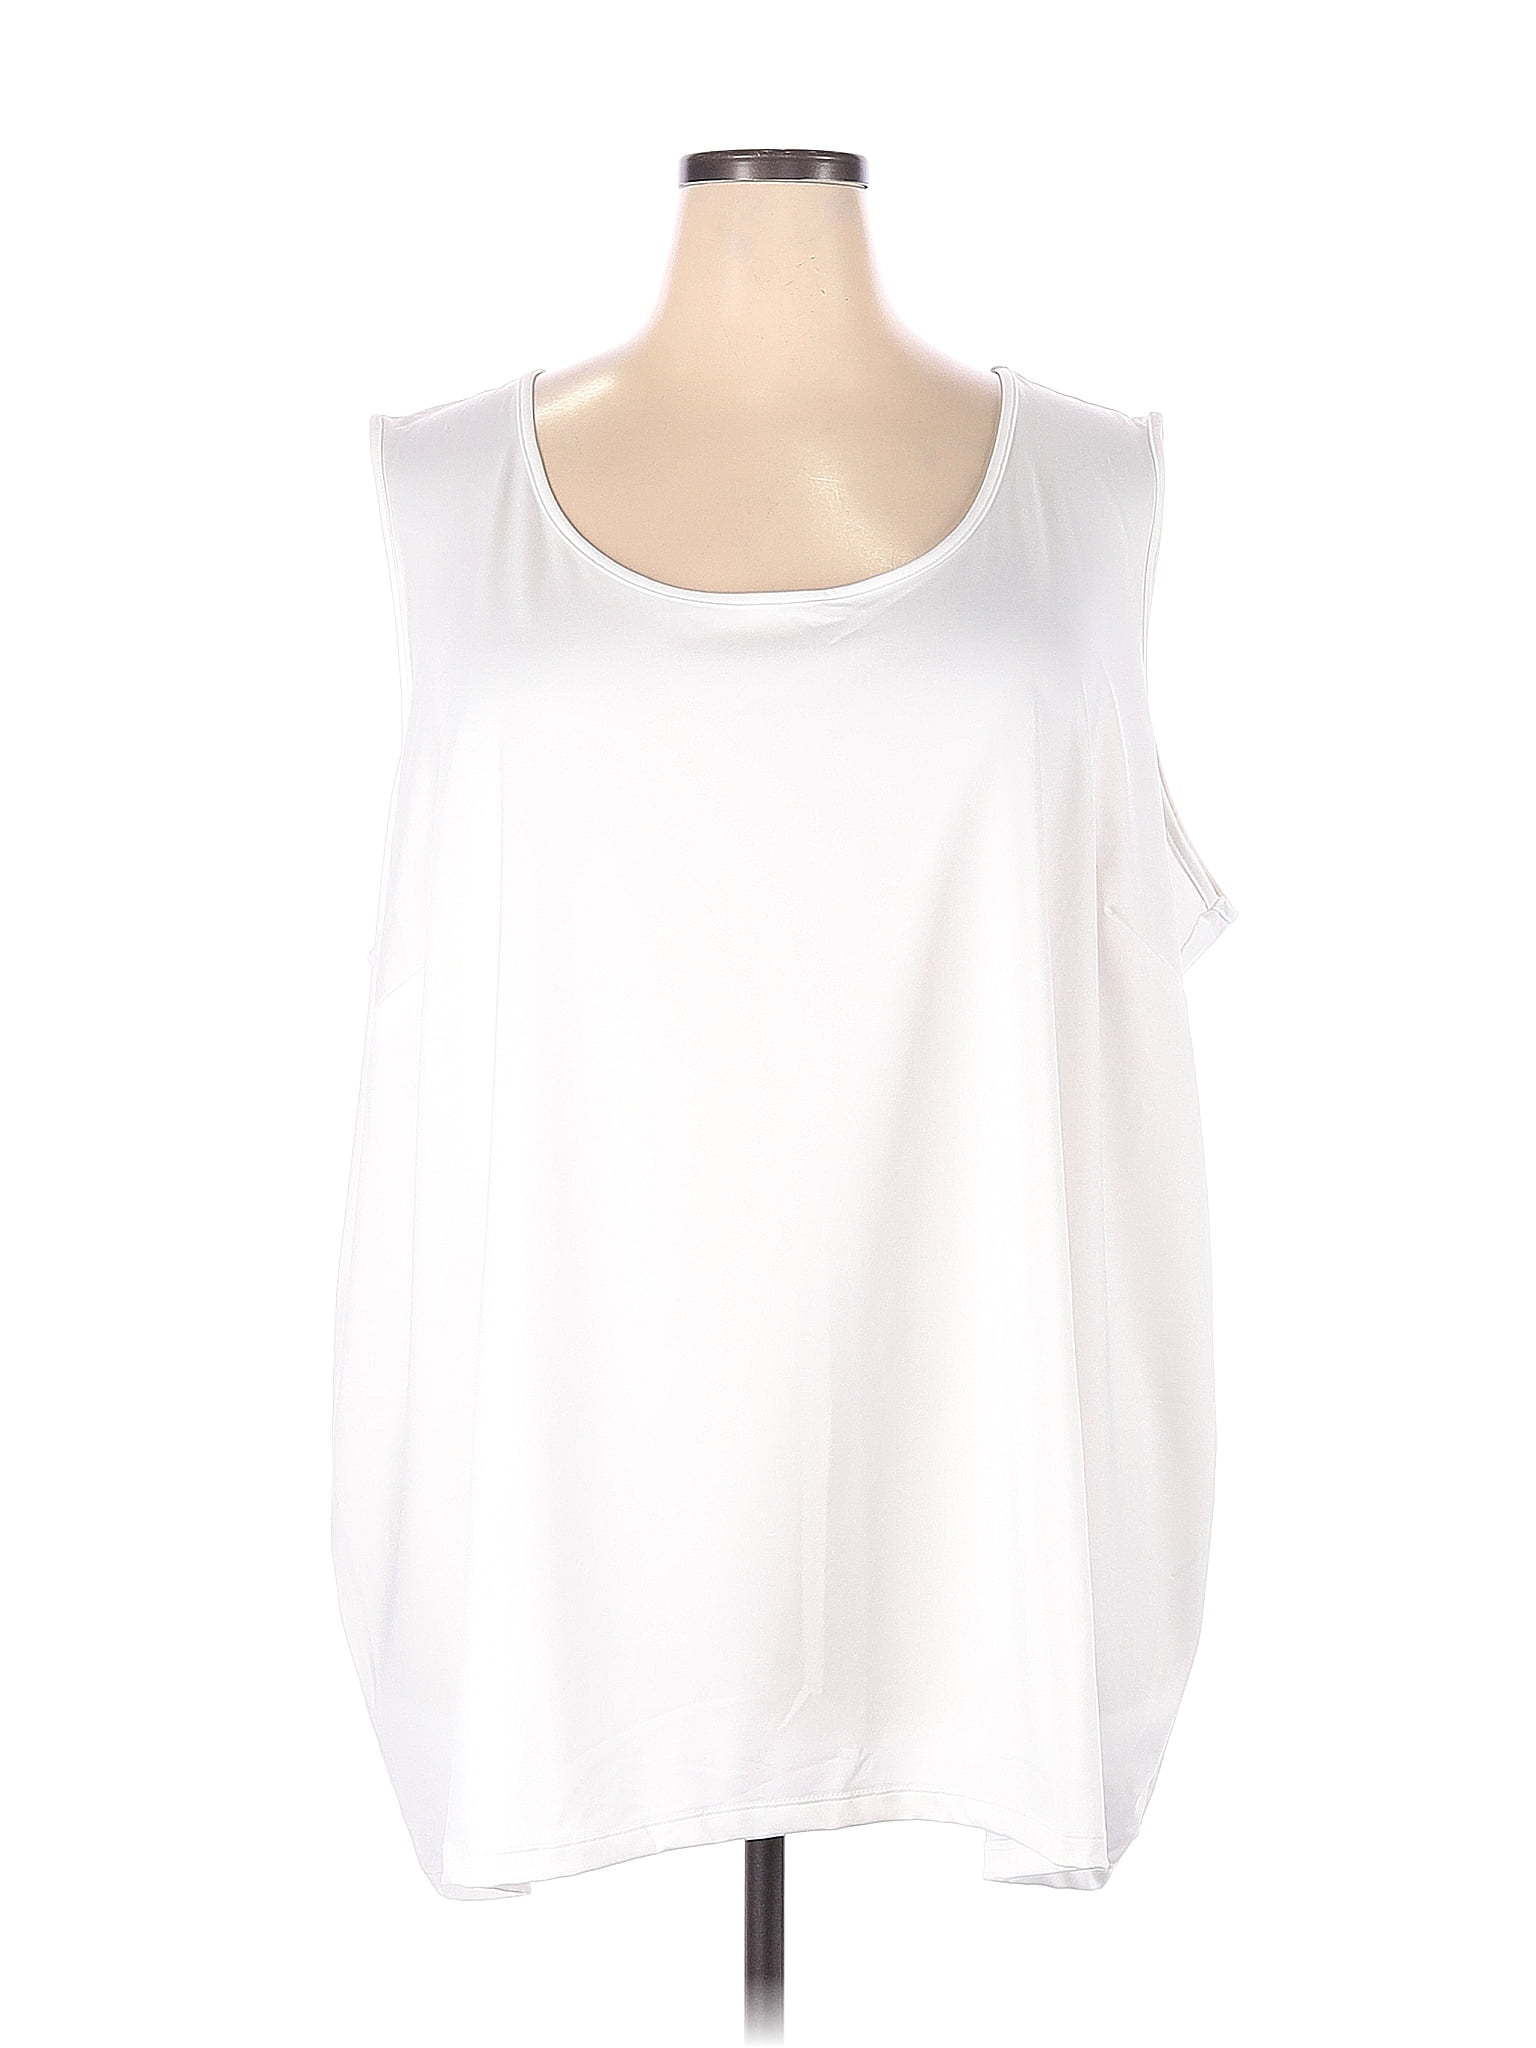 Catherines Solid White Sleeveless Blouse Size XXL - 58% off | thredUP